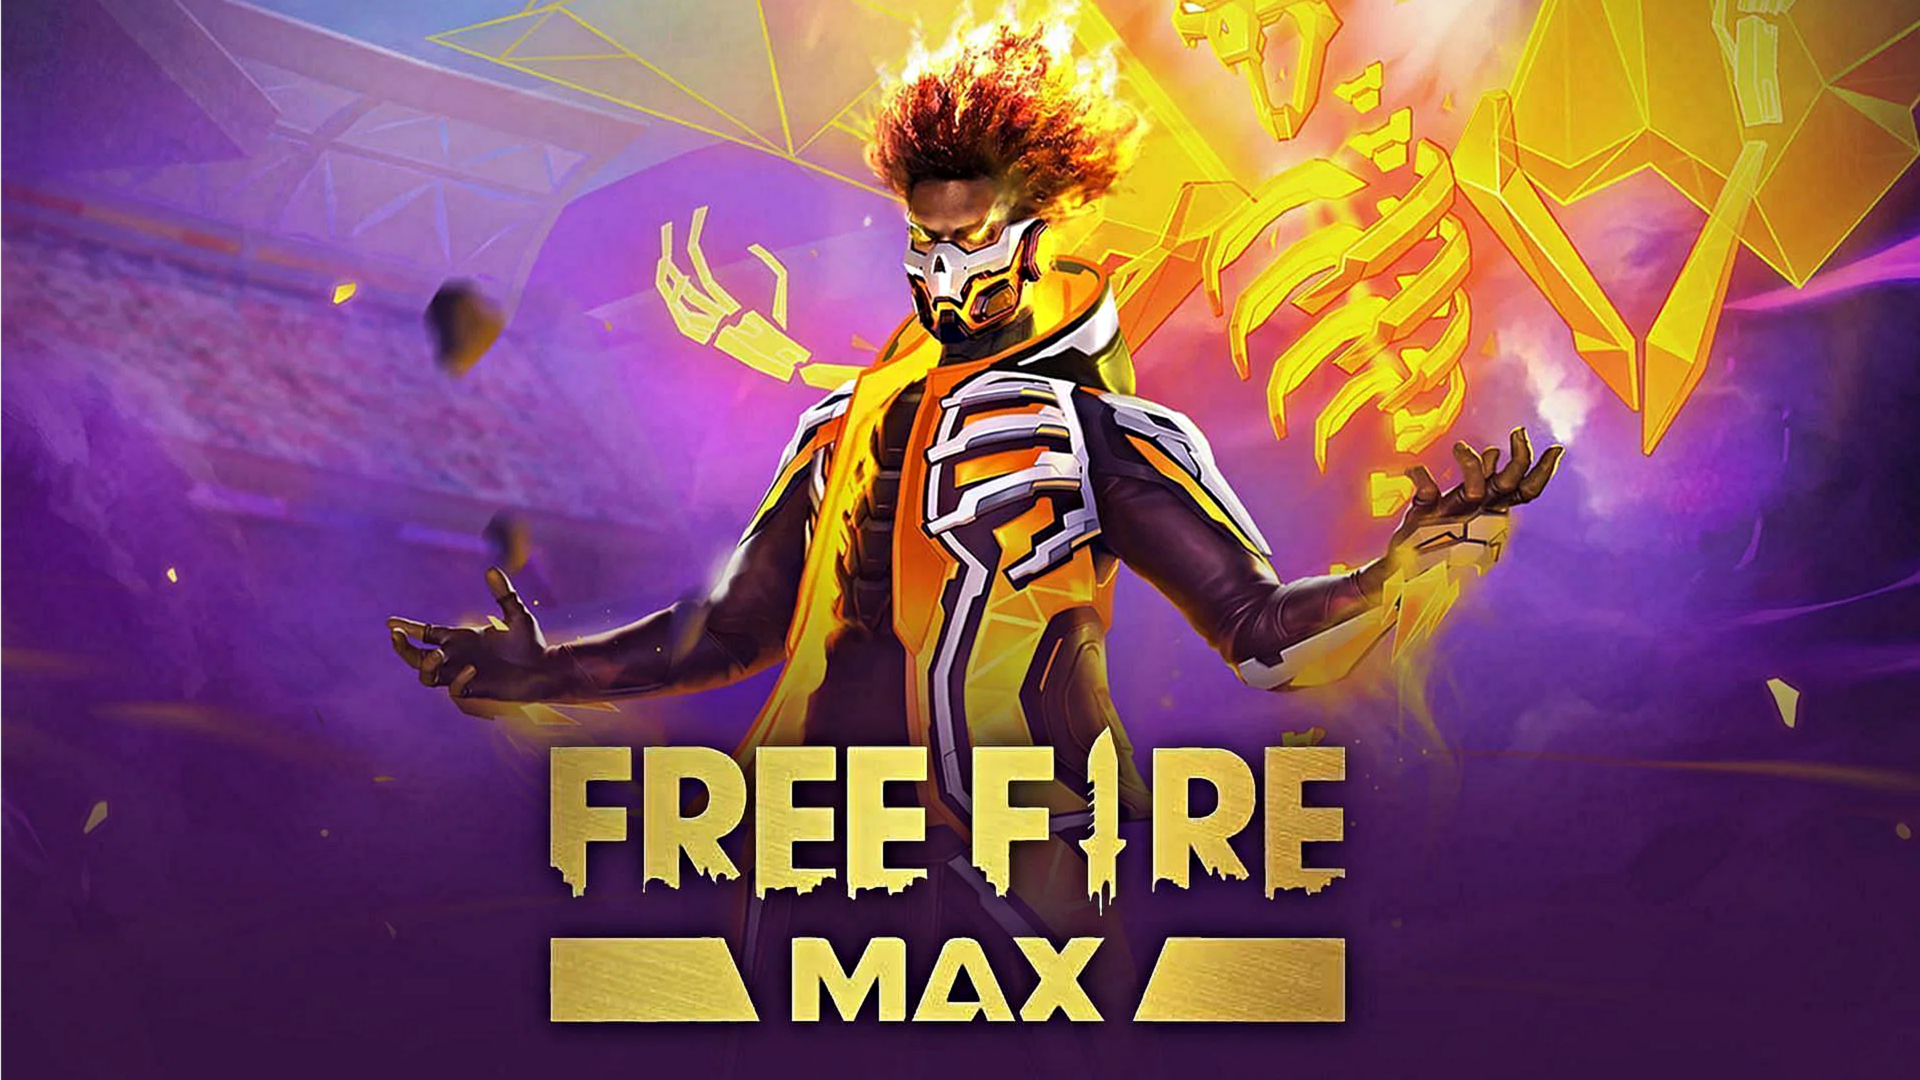 Free Fire MAX codes for May 13: How to redeem